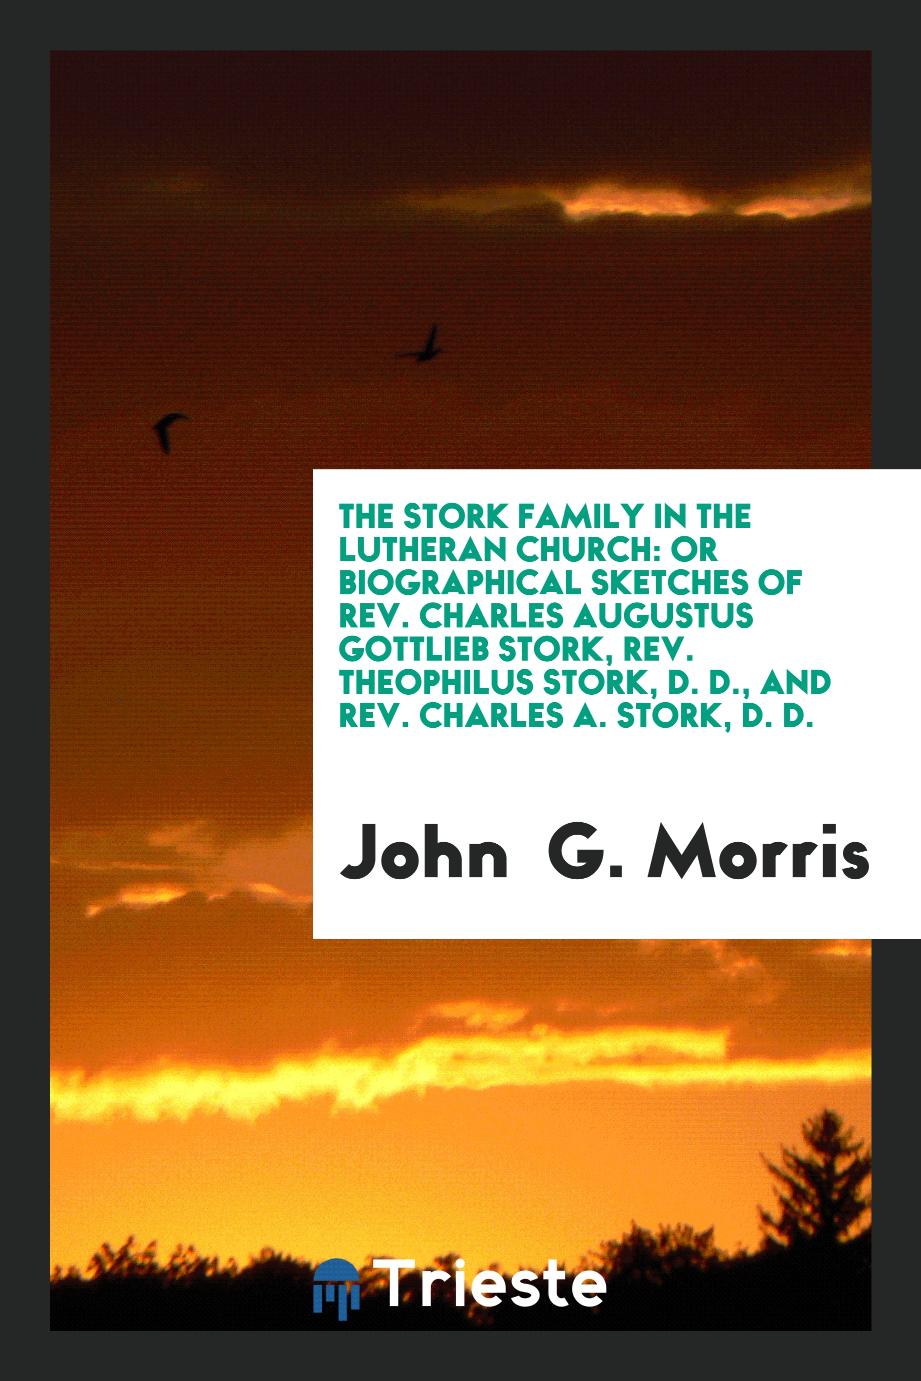 The Stork Family in the Lutheran Church: Or Biographical Sketches of Rev. Charles Augustus Gottlieb Stork, Rev. Theophilus Stork, D. D., and Rev. Charles A. Stork, D. D.